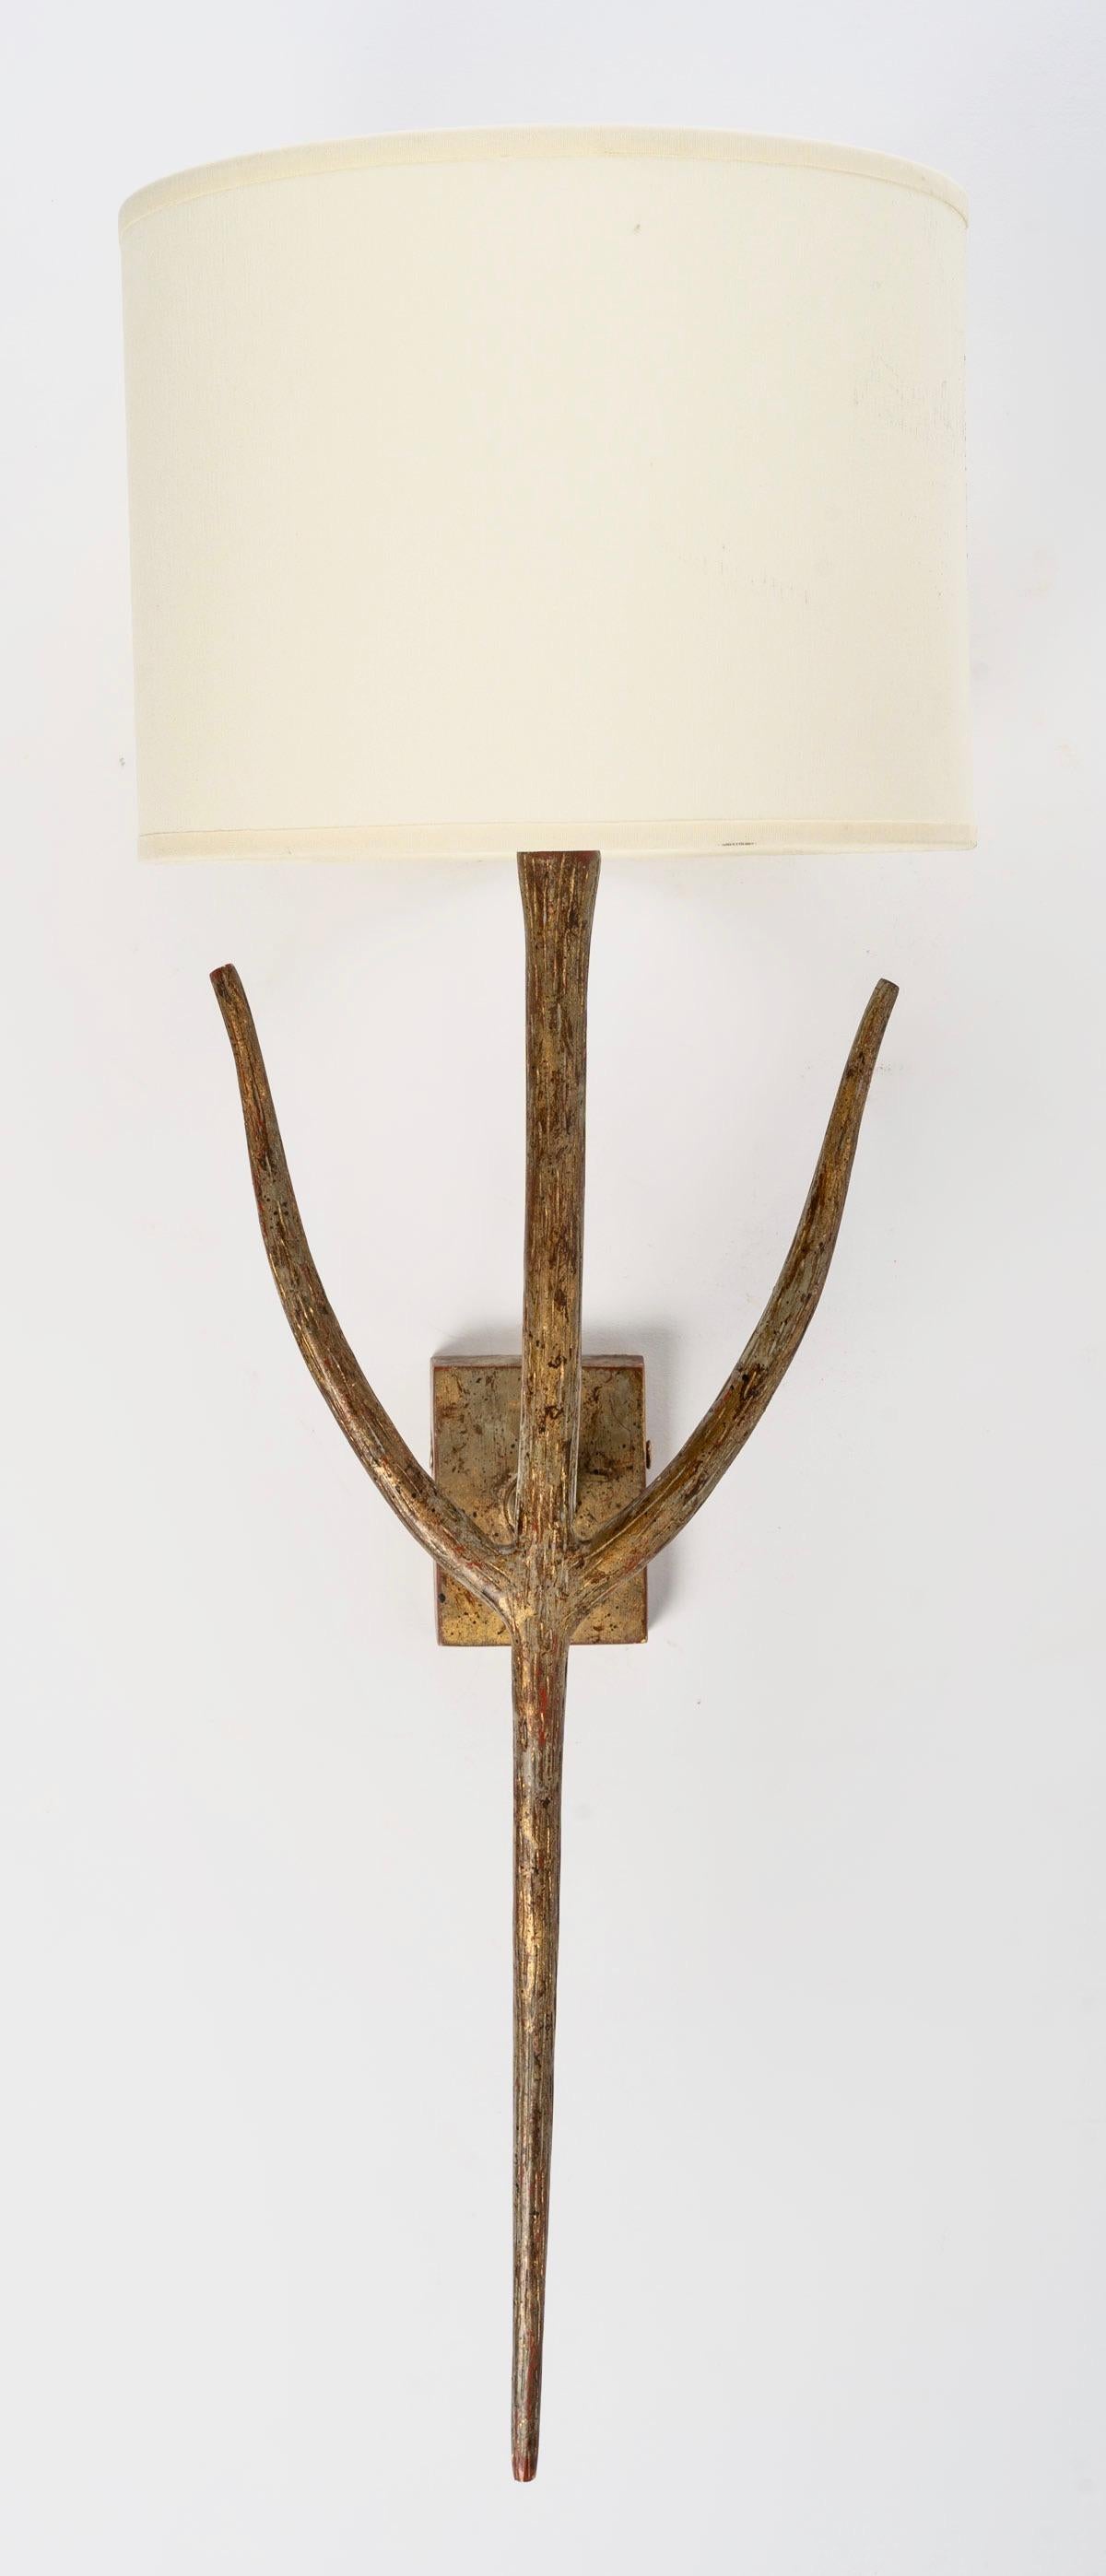 The wall lights are in bronze with a nuanced patina imitating a ribbed branch.
Composed of a luminous central arm adorned with two small branches on either side of the wall lamp and dressed in an
Off-white cylindrical shade.
The central arm rests